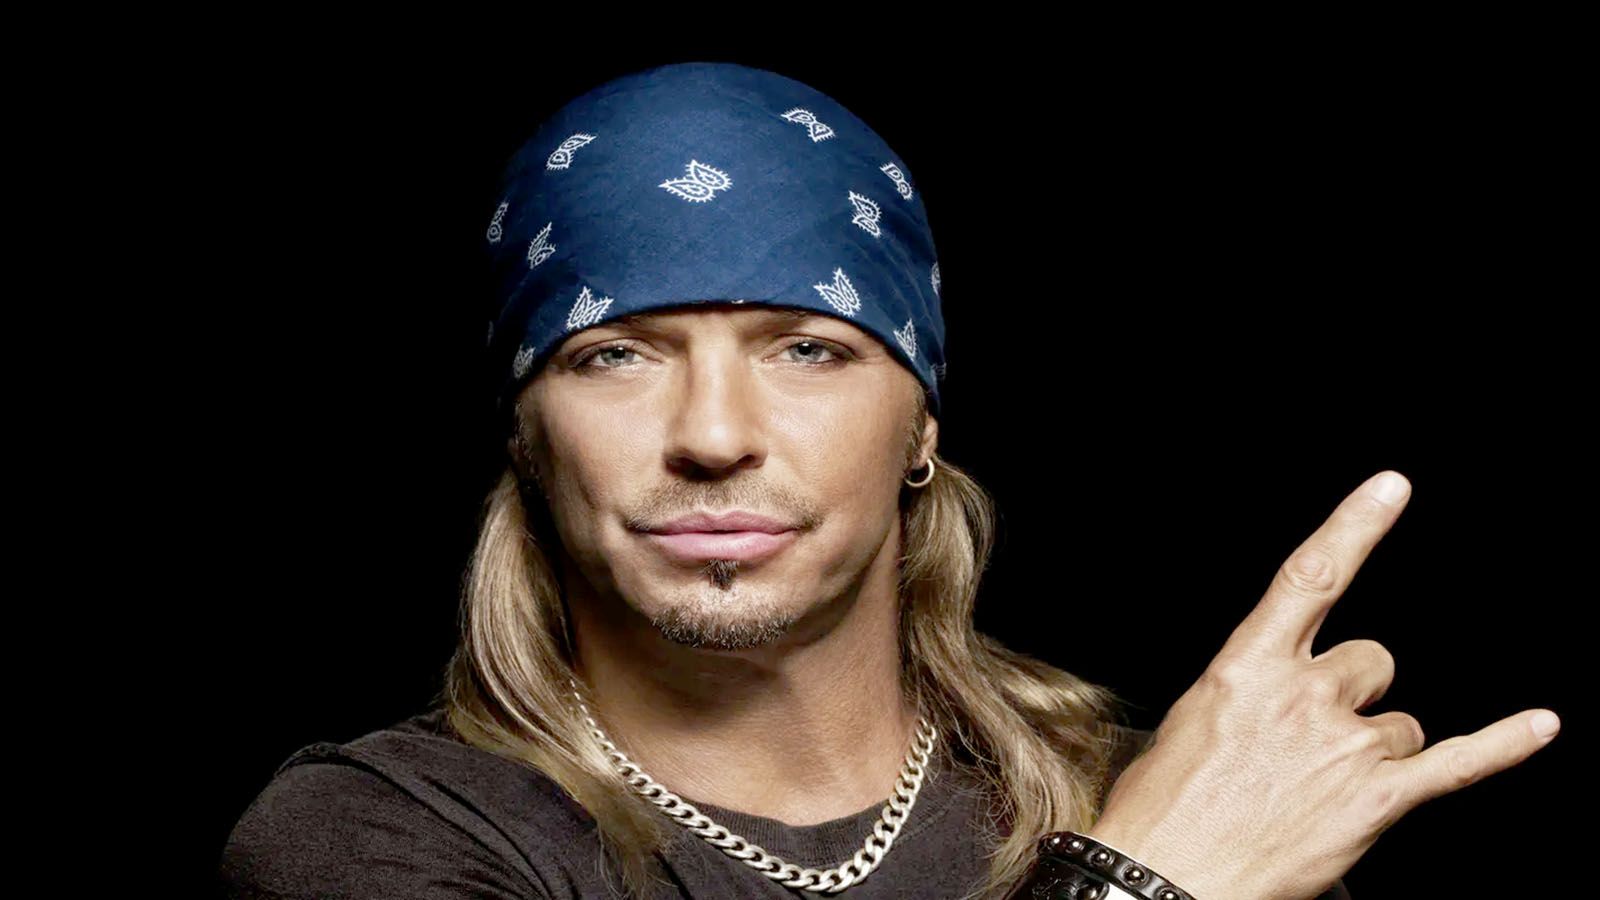 Bret Michaels' Parti-Gras will be at Blue Gate Performing Arts Center on Nov. 17.